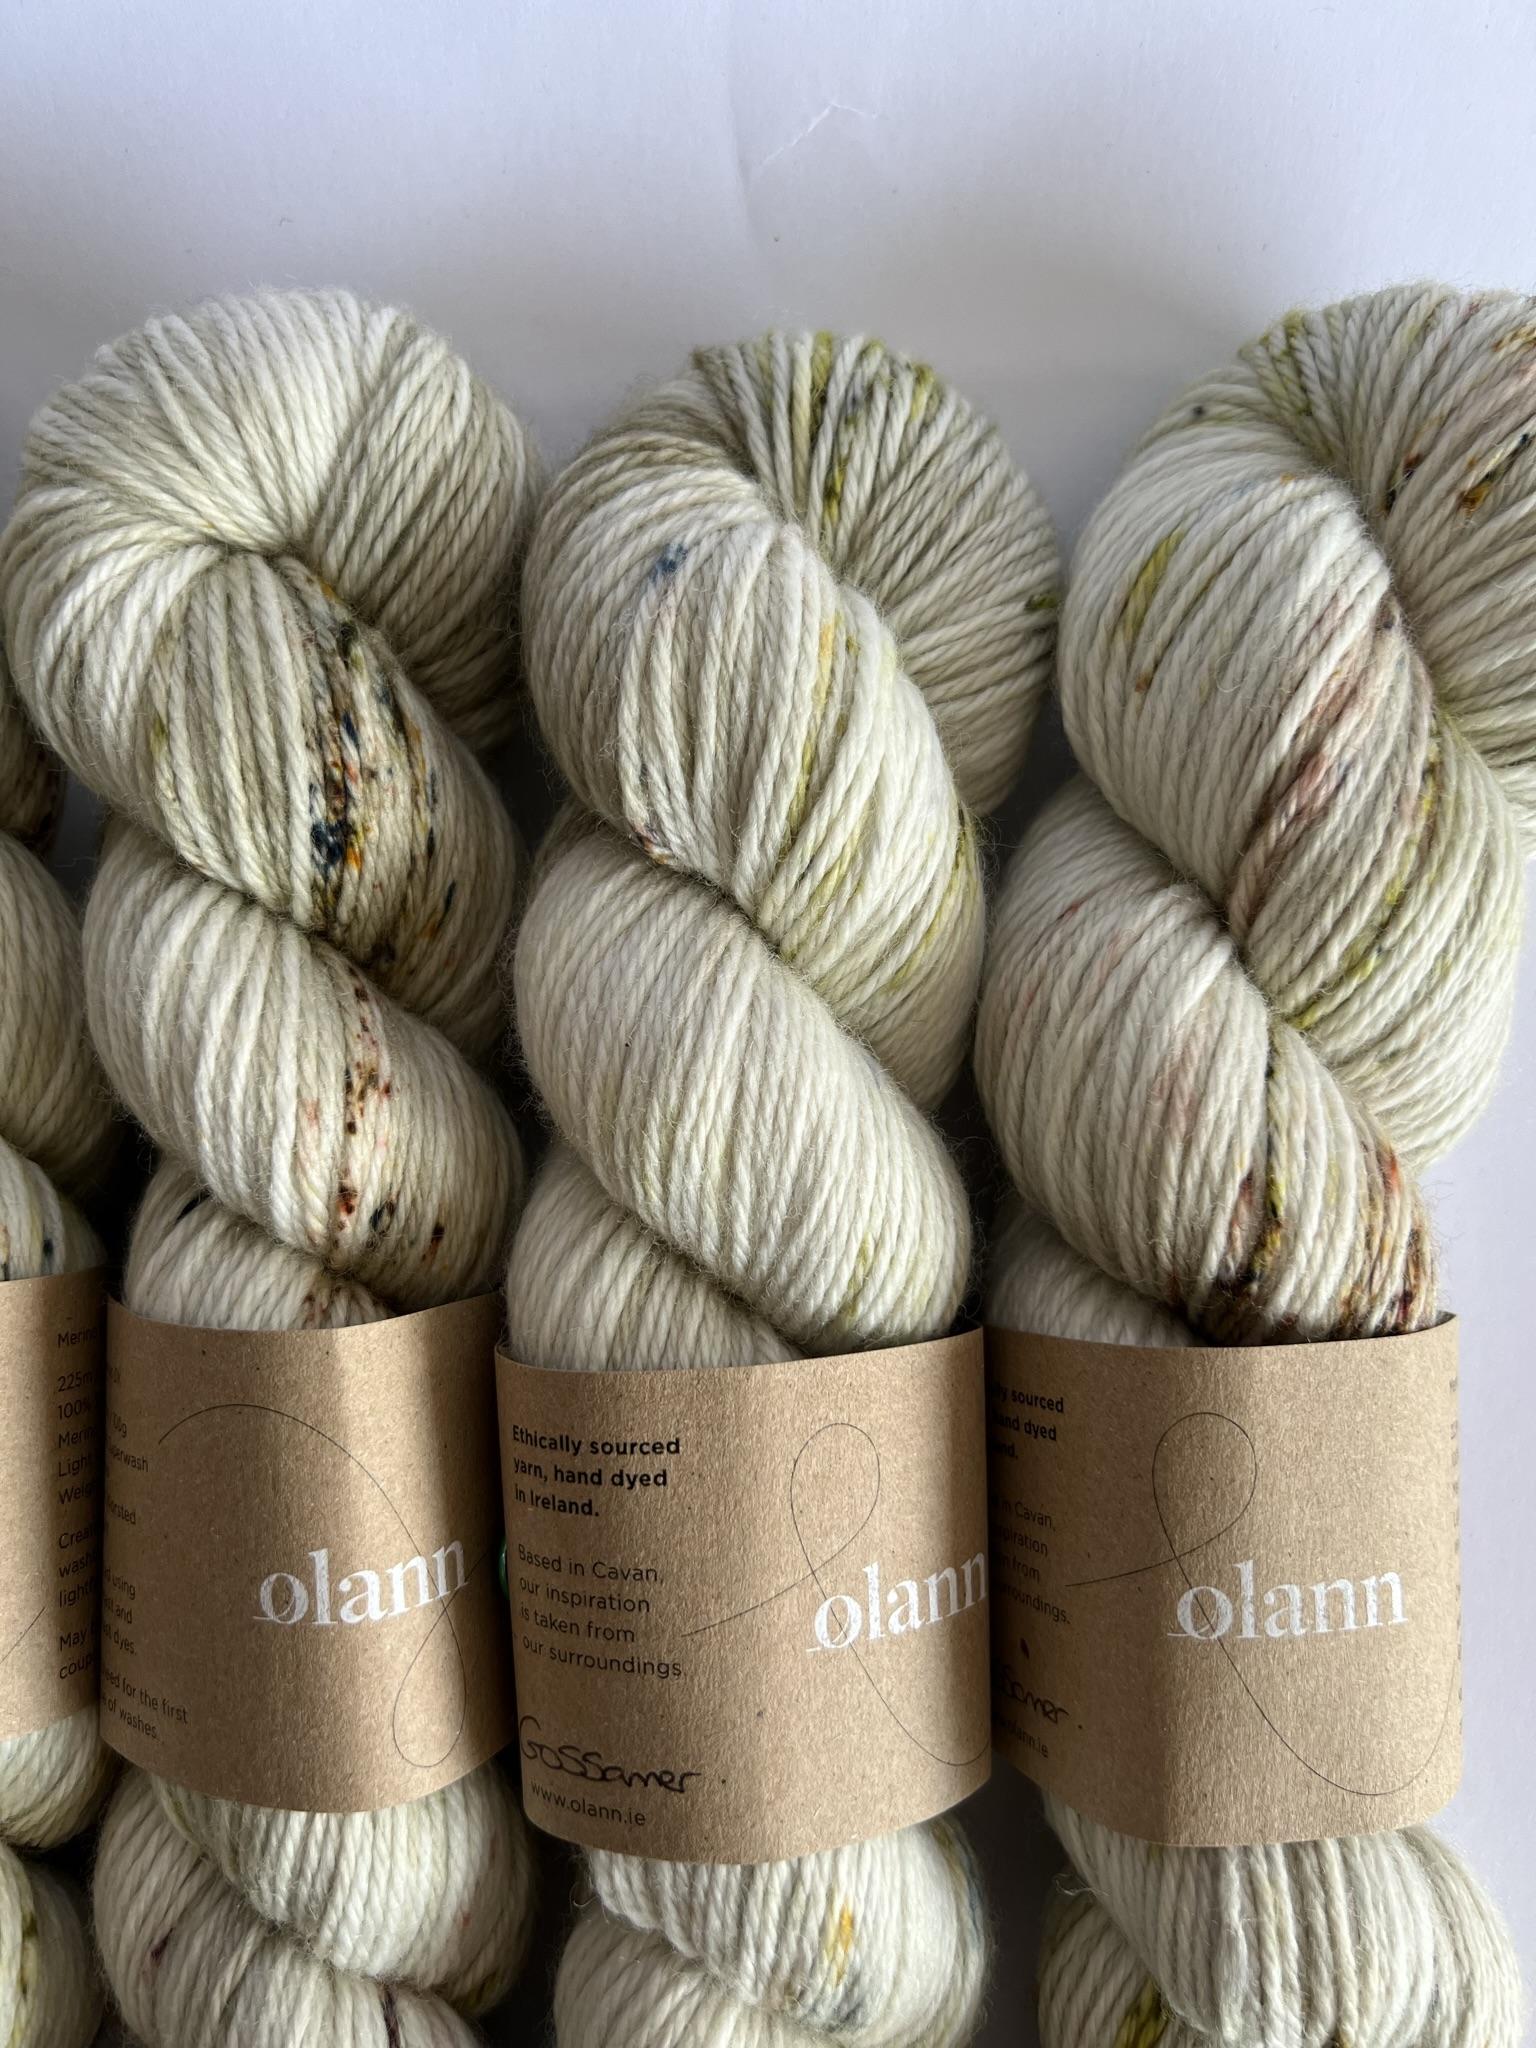 Ethically Sourced Wool